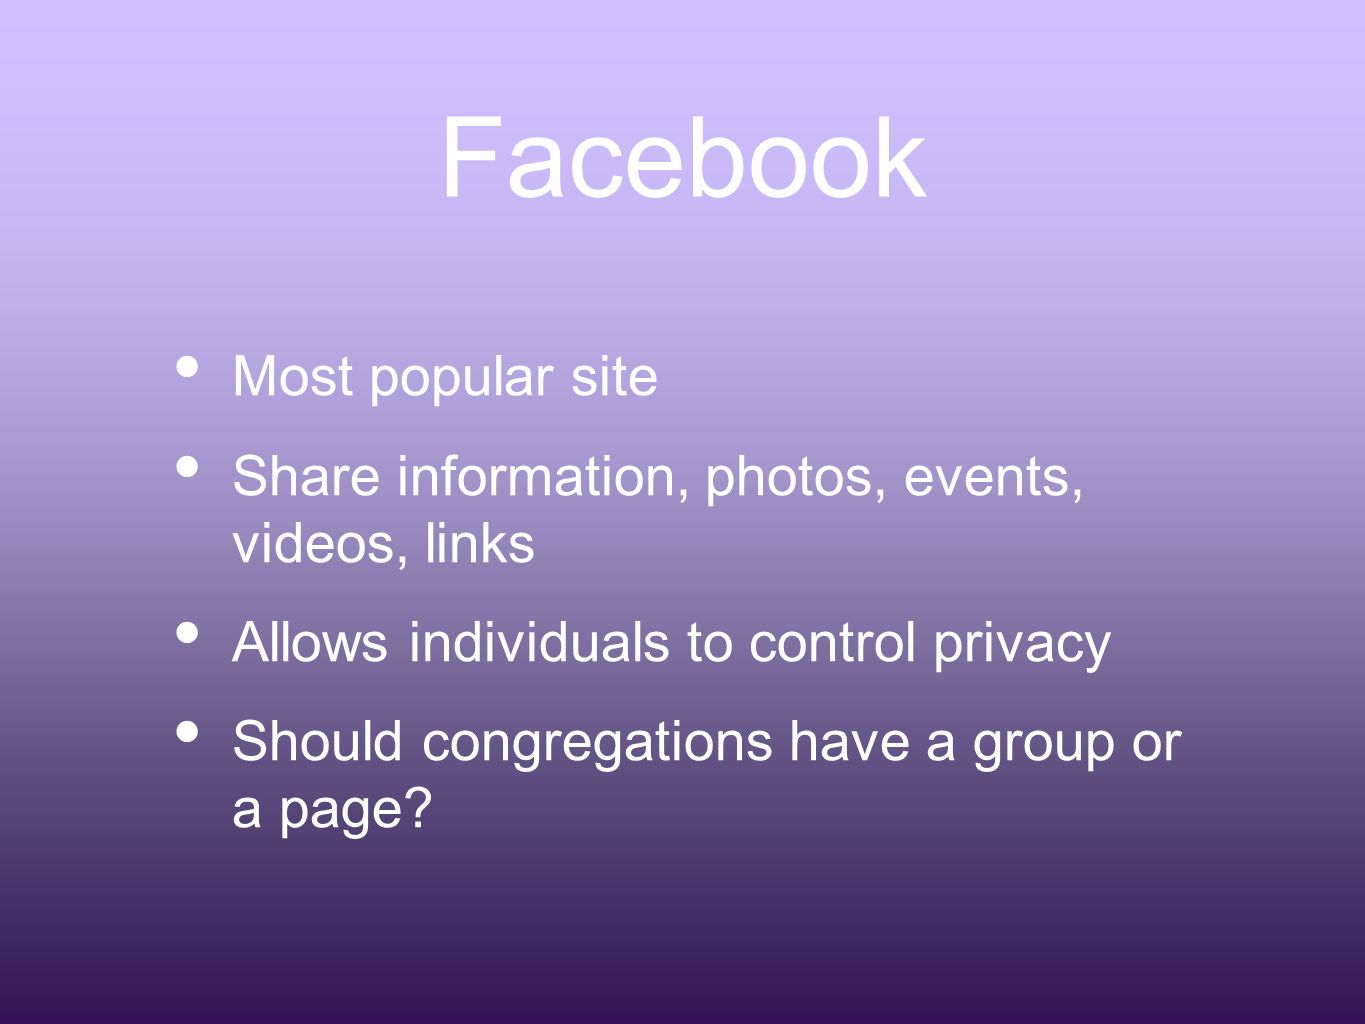 Facebook Most popular site Share information, photos, events, videos, links Allows individuals to control privacy Should congregations have a group or a page